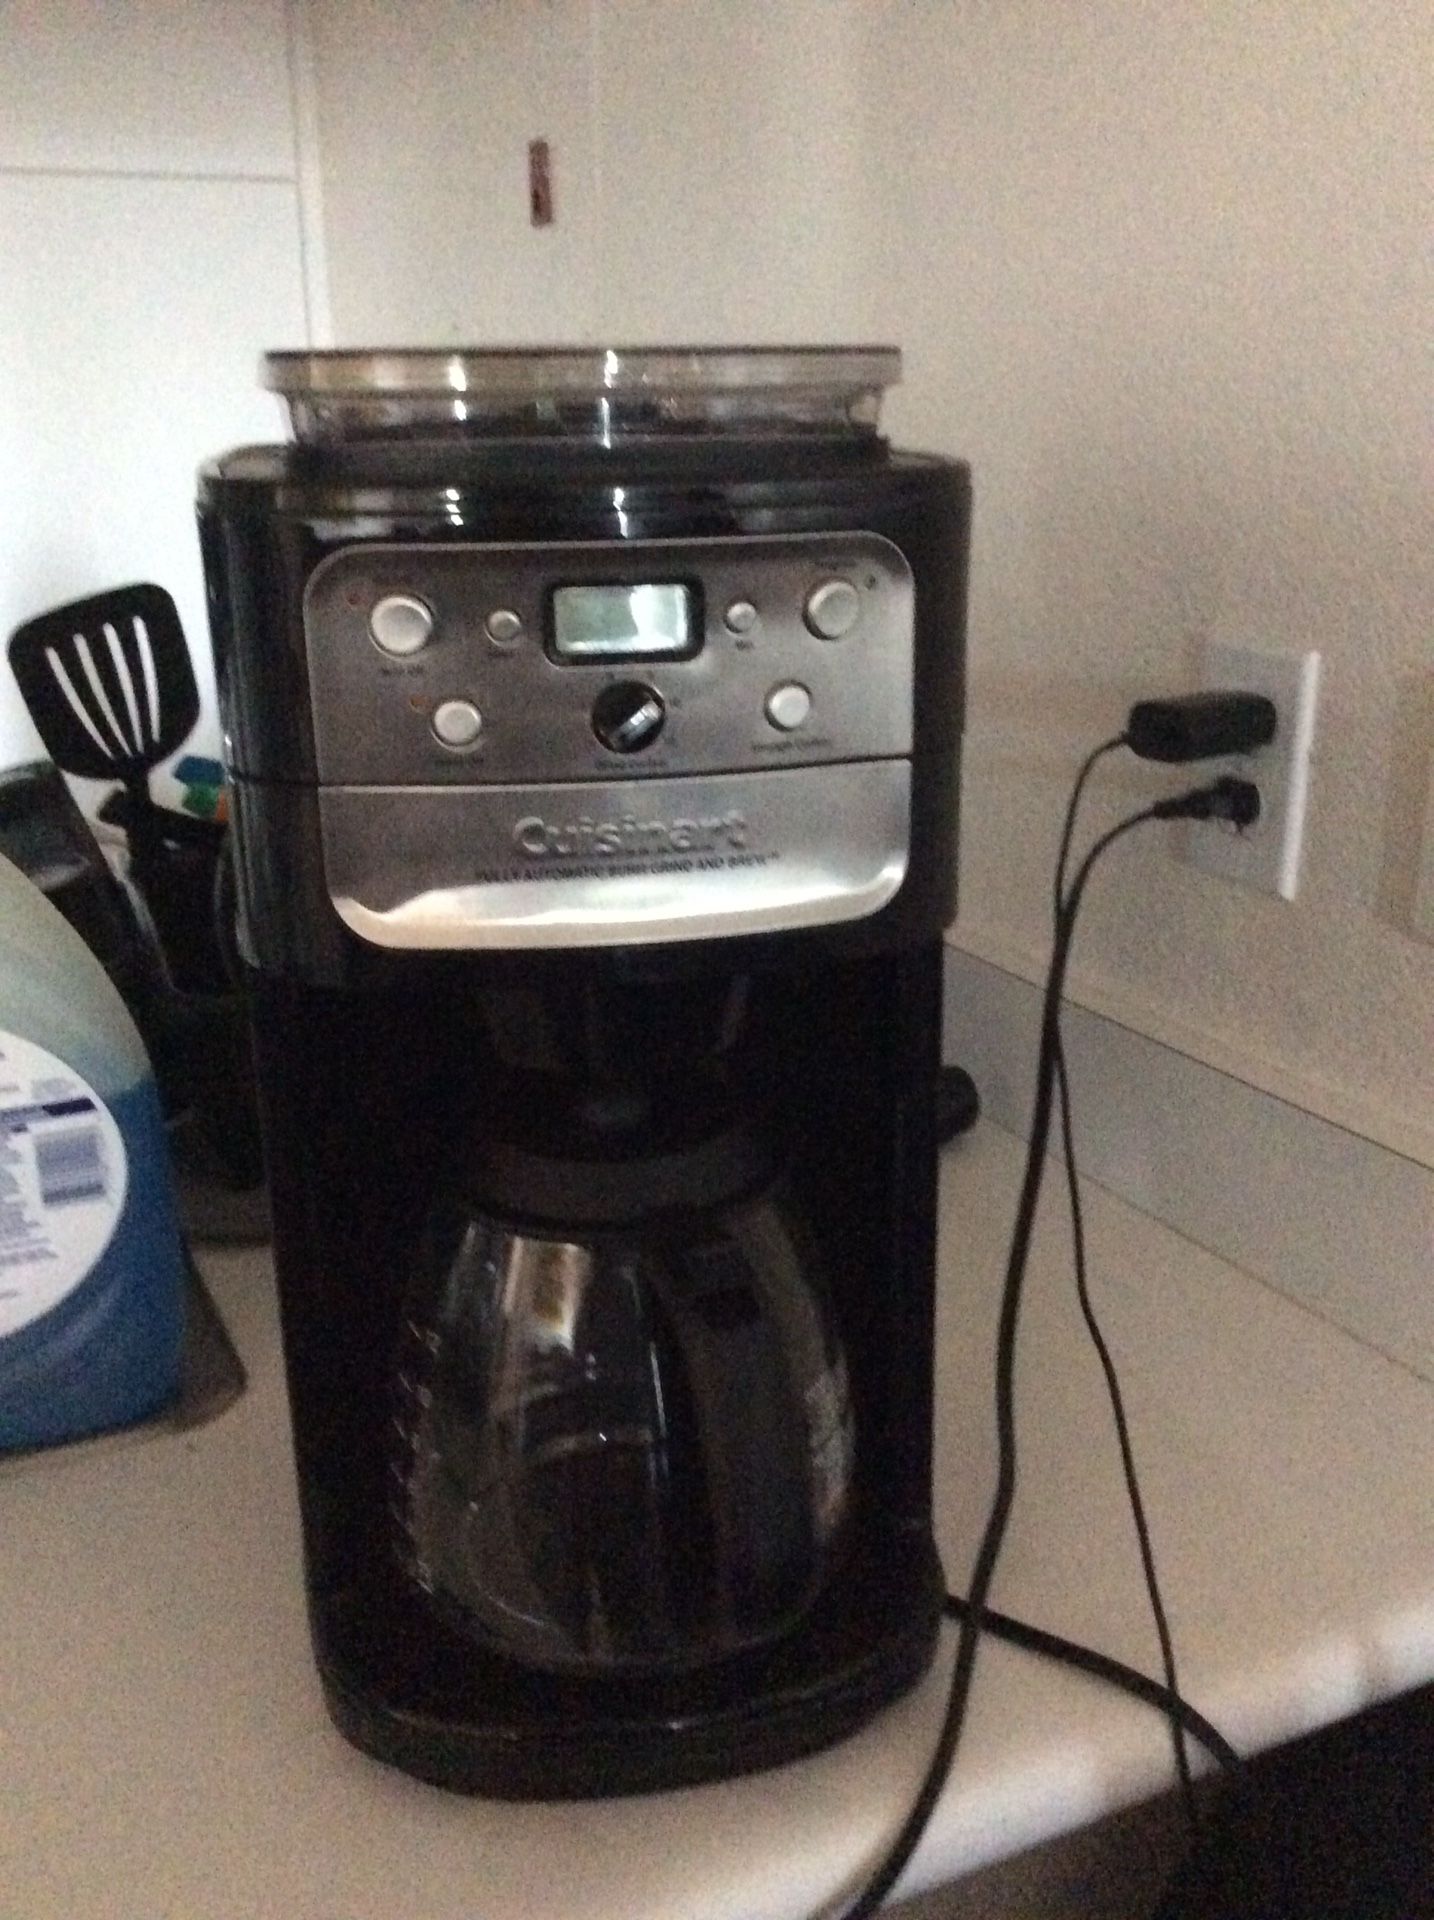 Grind and brew coffee maker 20$